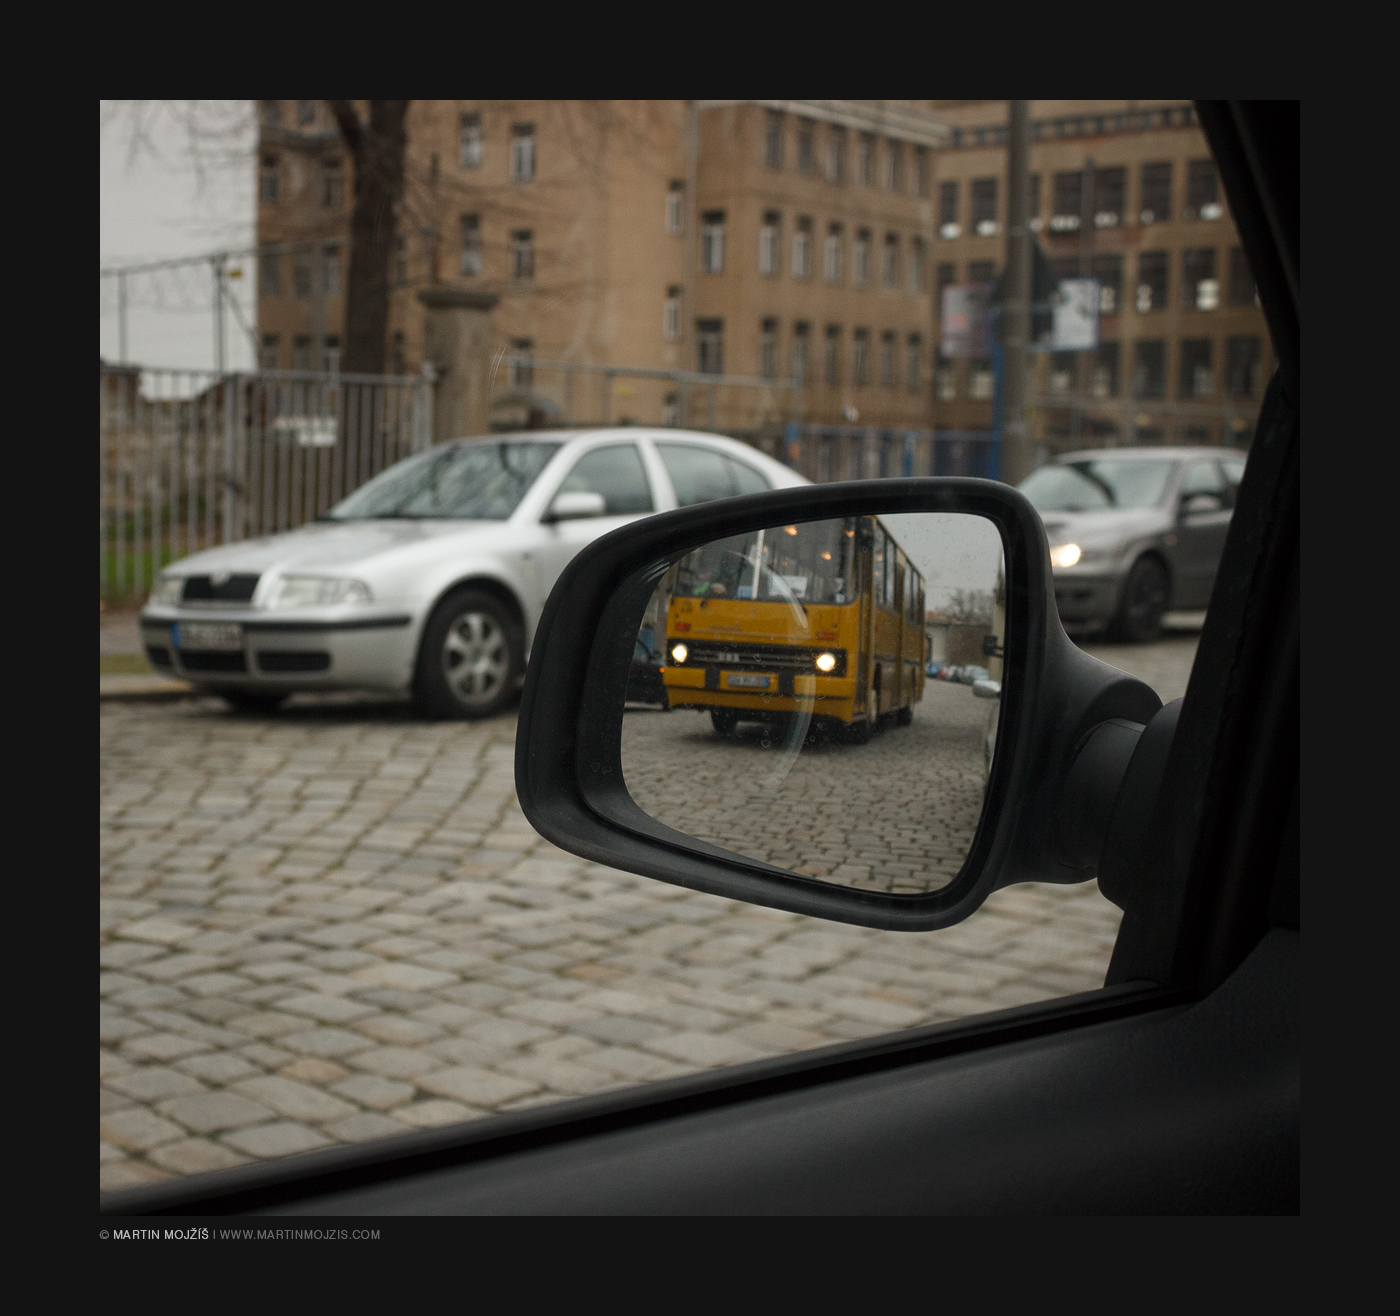 A yellow bus Ikarus 260 in a rear view mirror.